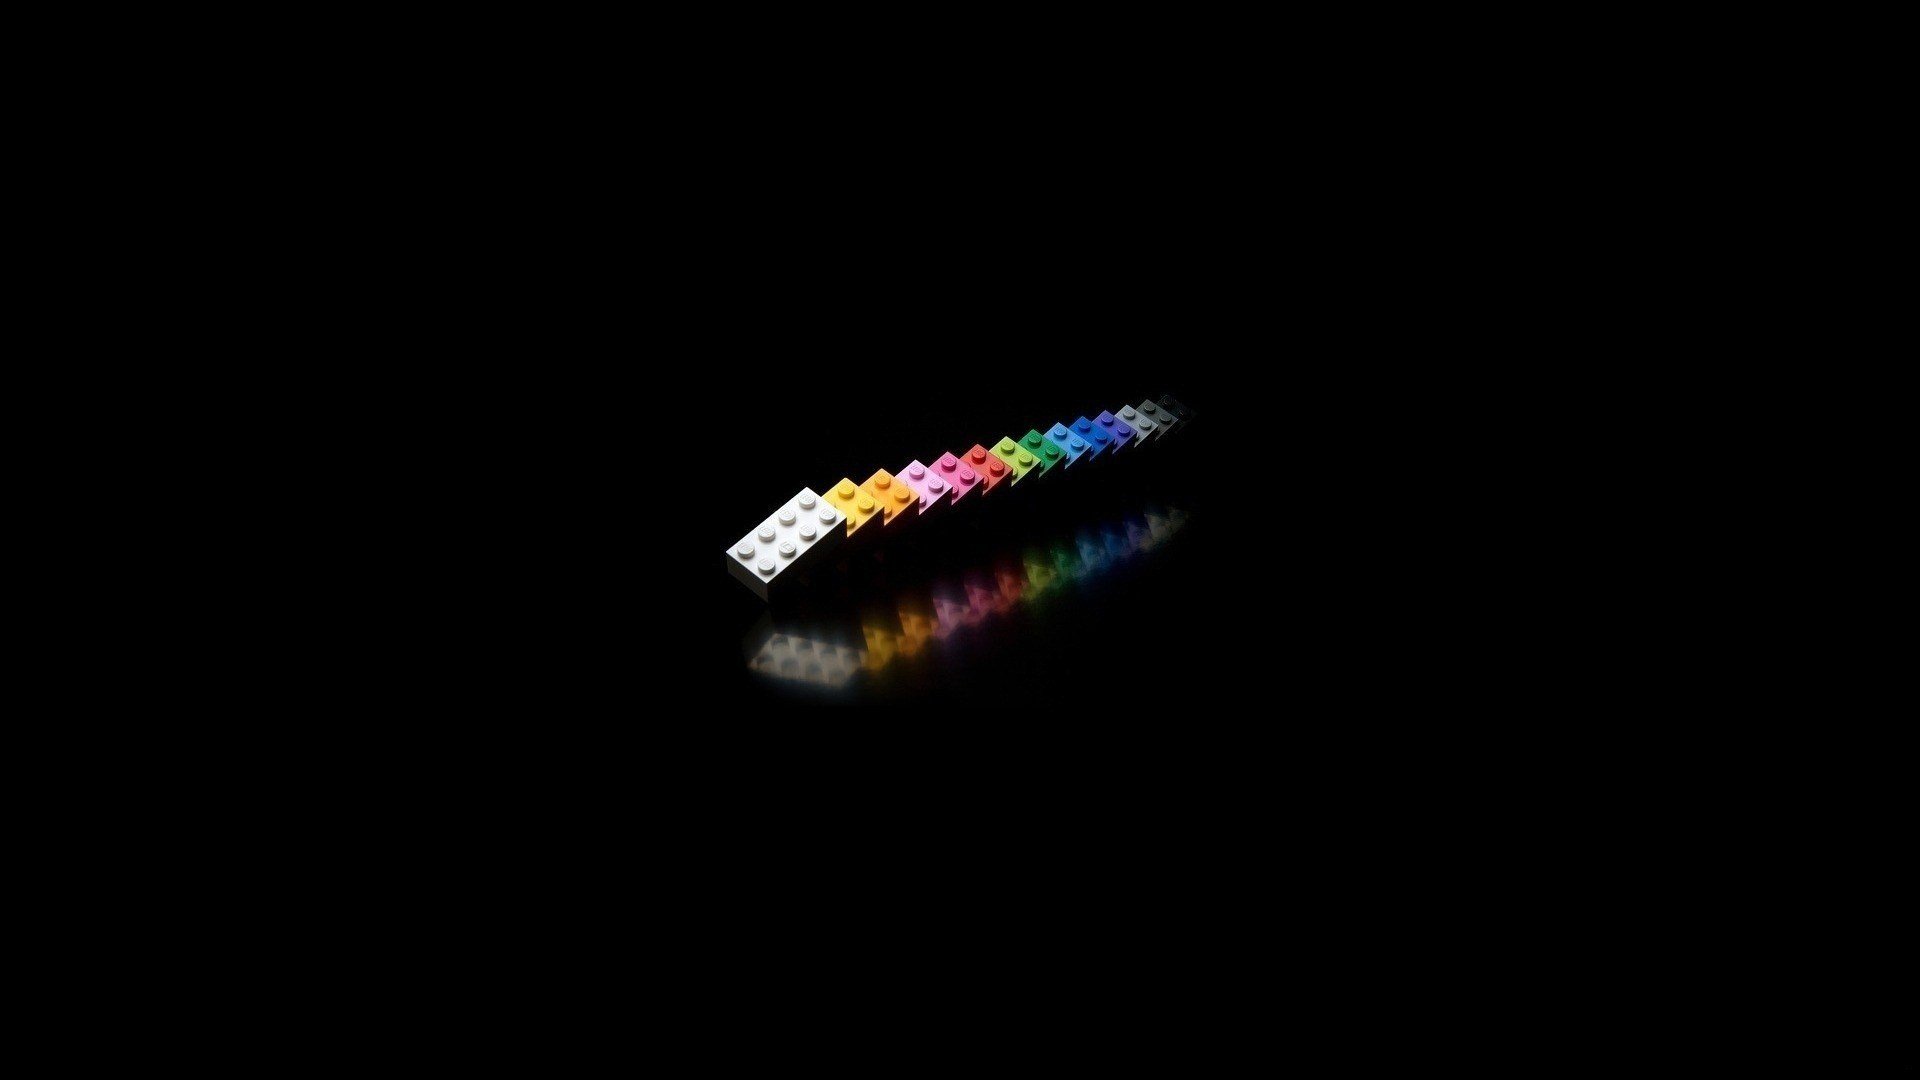 Lego Minimalism Hd Wallpapers Desktop And Mobile Images Photos